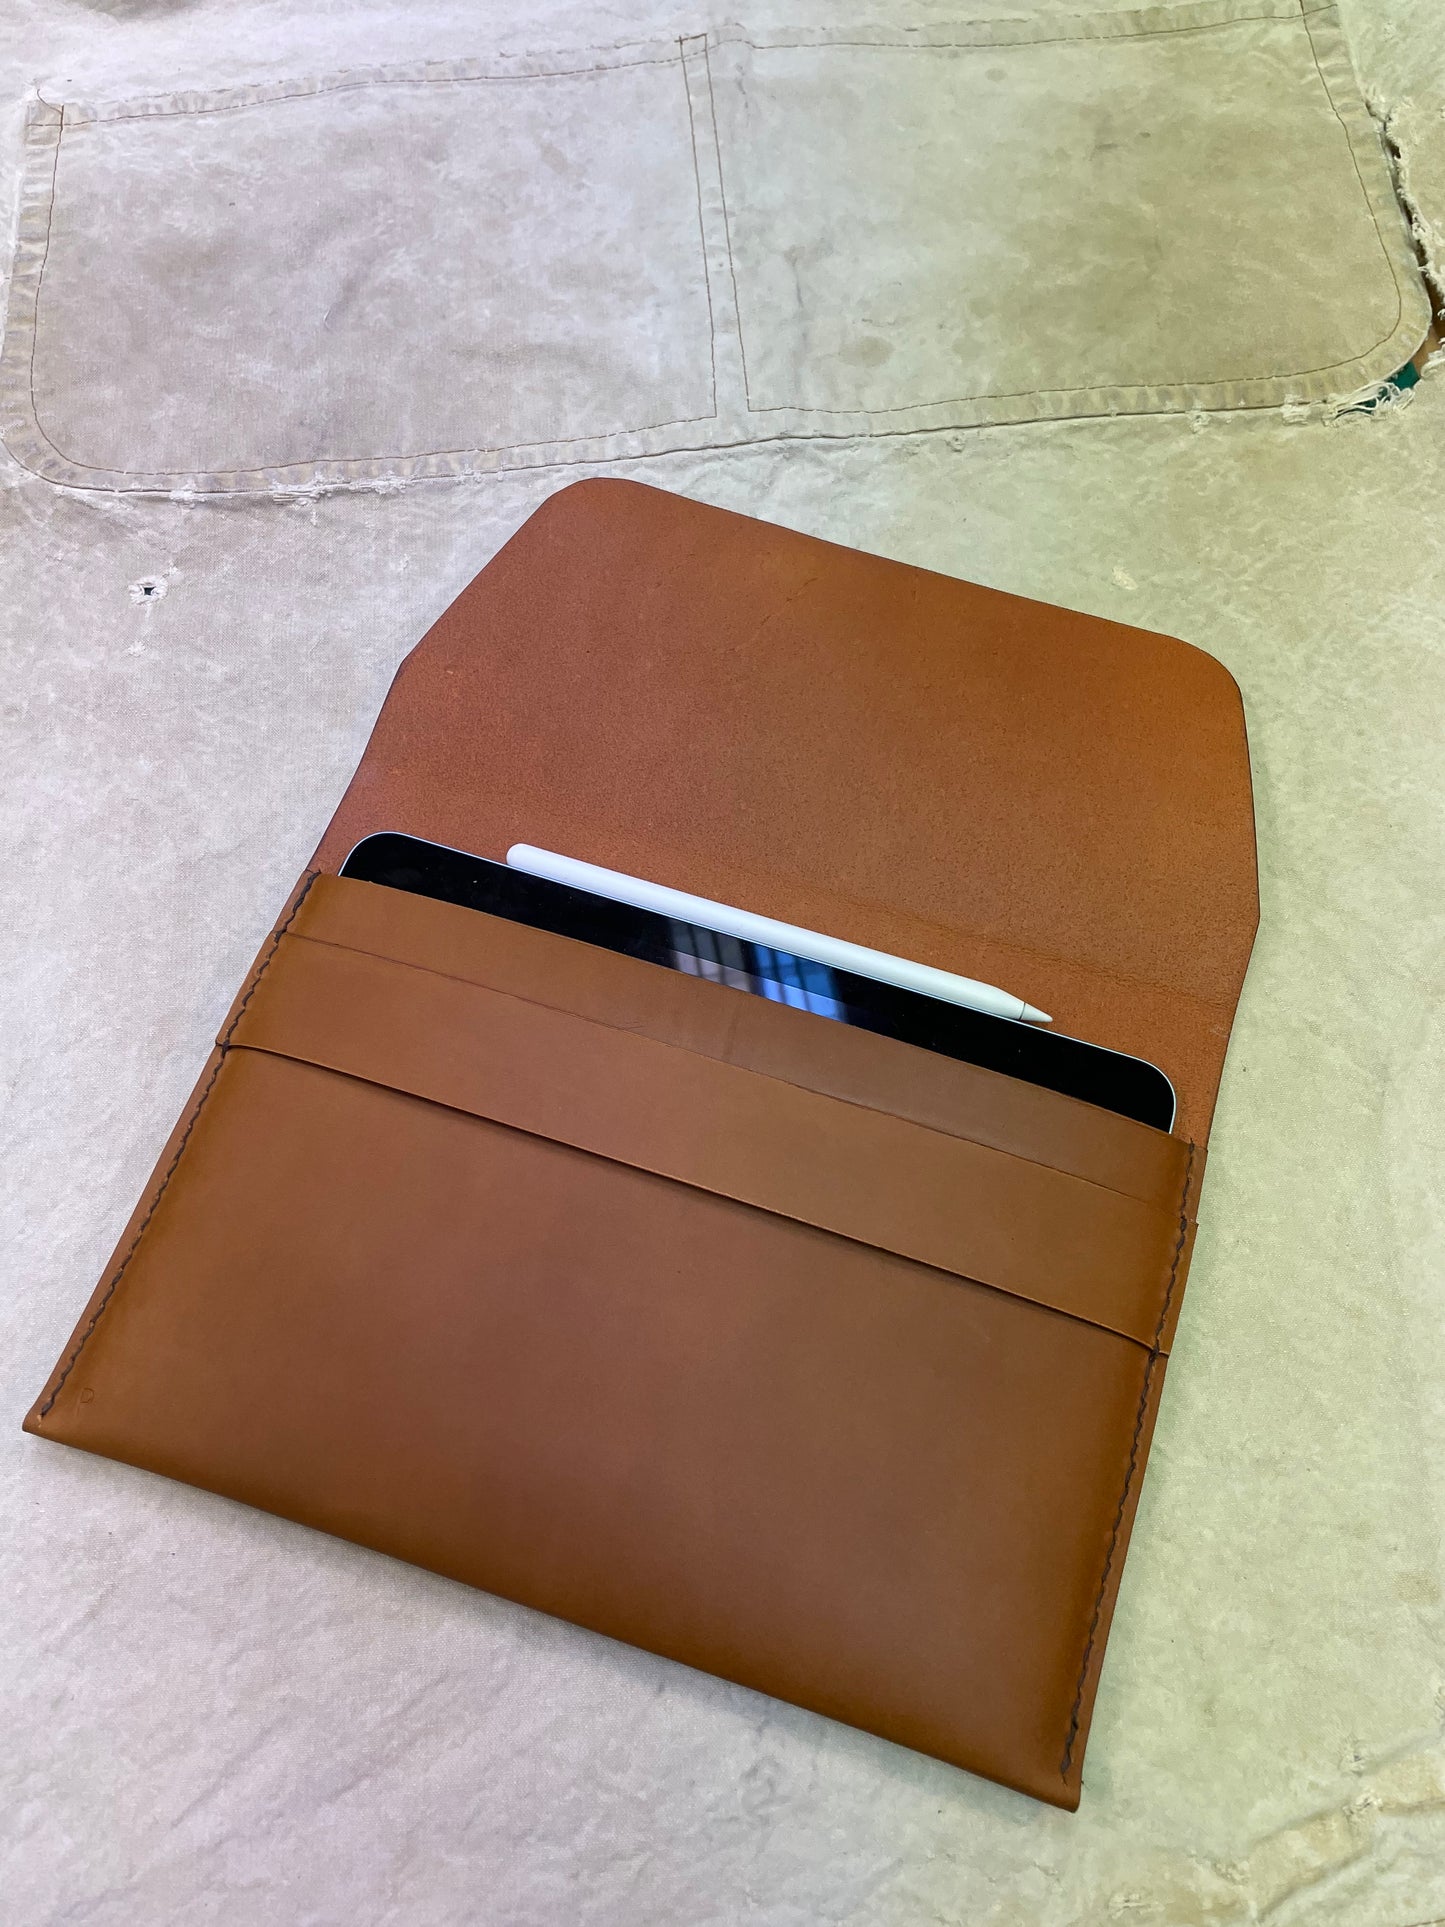 TWO DAY TRADITIONAL LEATHER COURSE